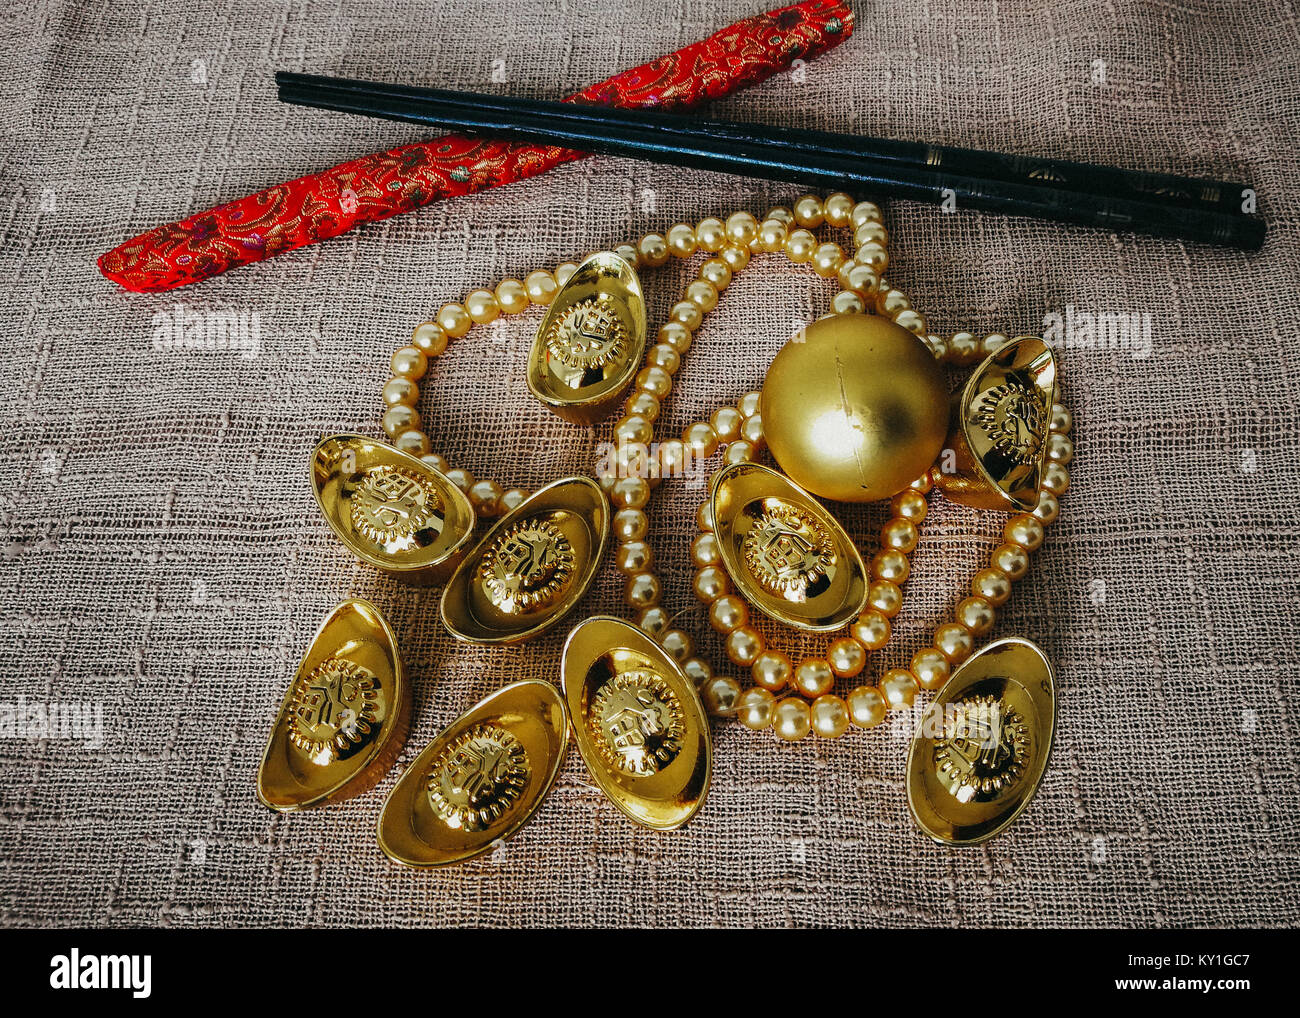 Chinese New Year celebration with decoration, gold ingots and golden pearls represent luxury and prosperity Stock Photo